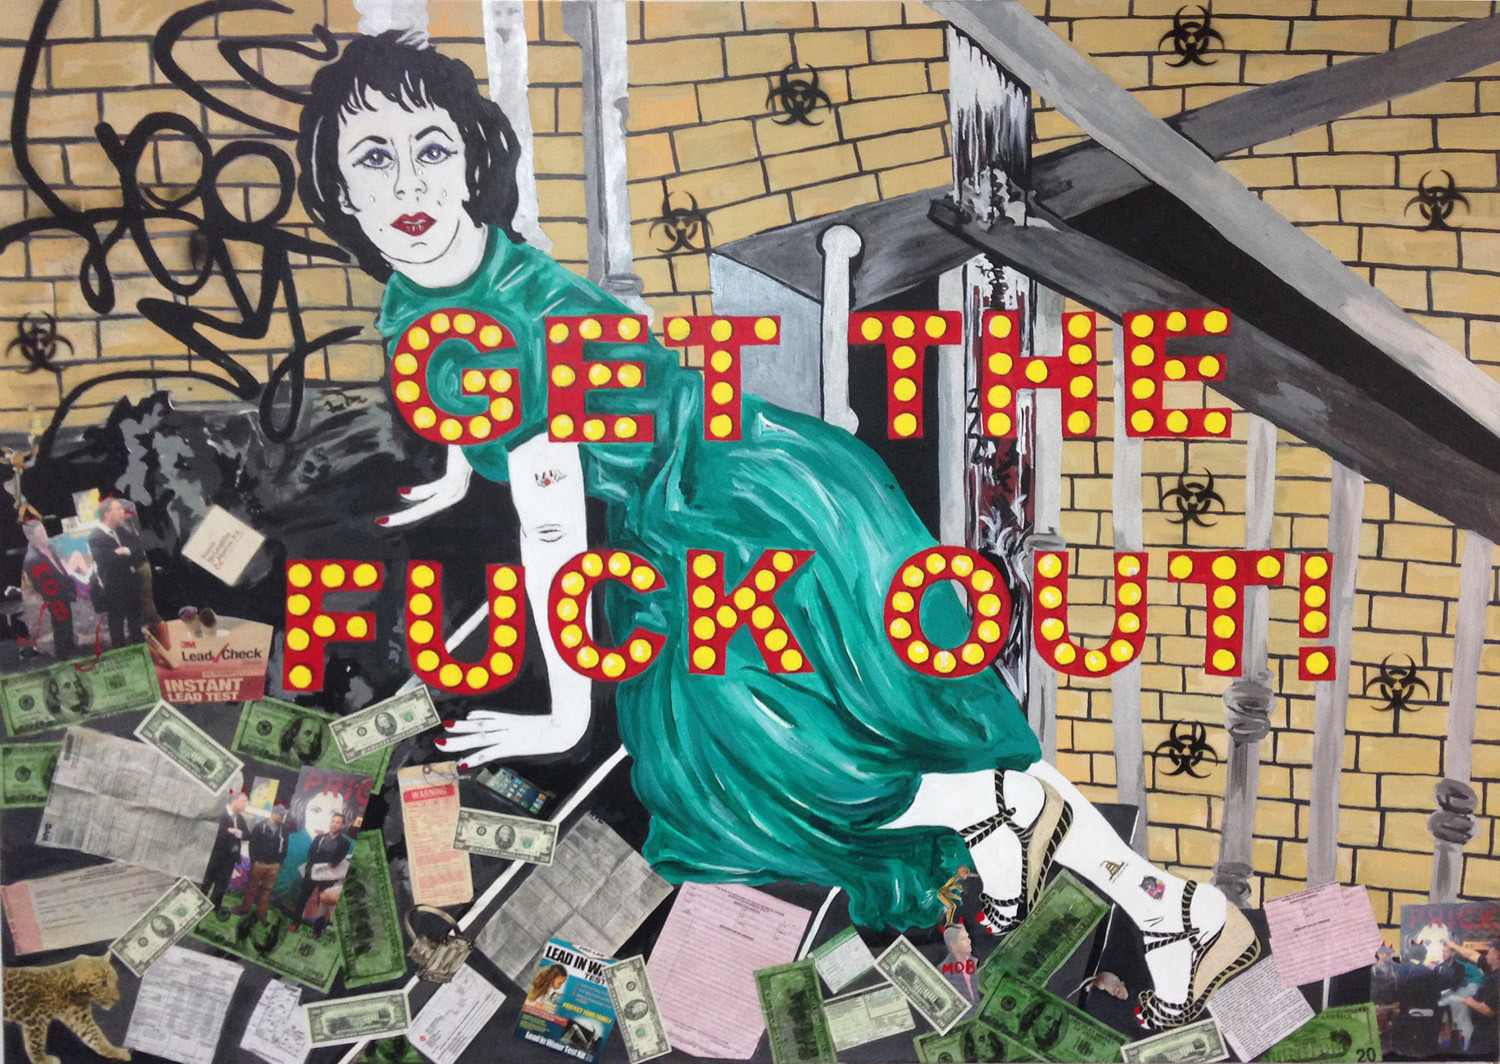 Get the Fuck Out: from the Liz Taylor Series (Elephant Walk)